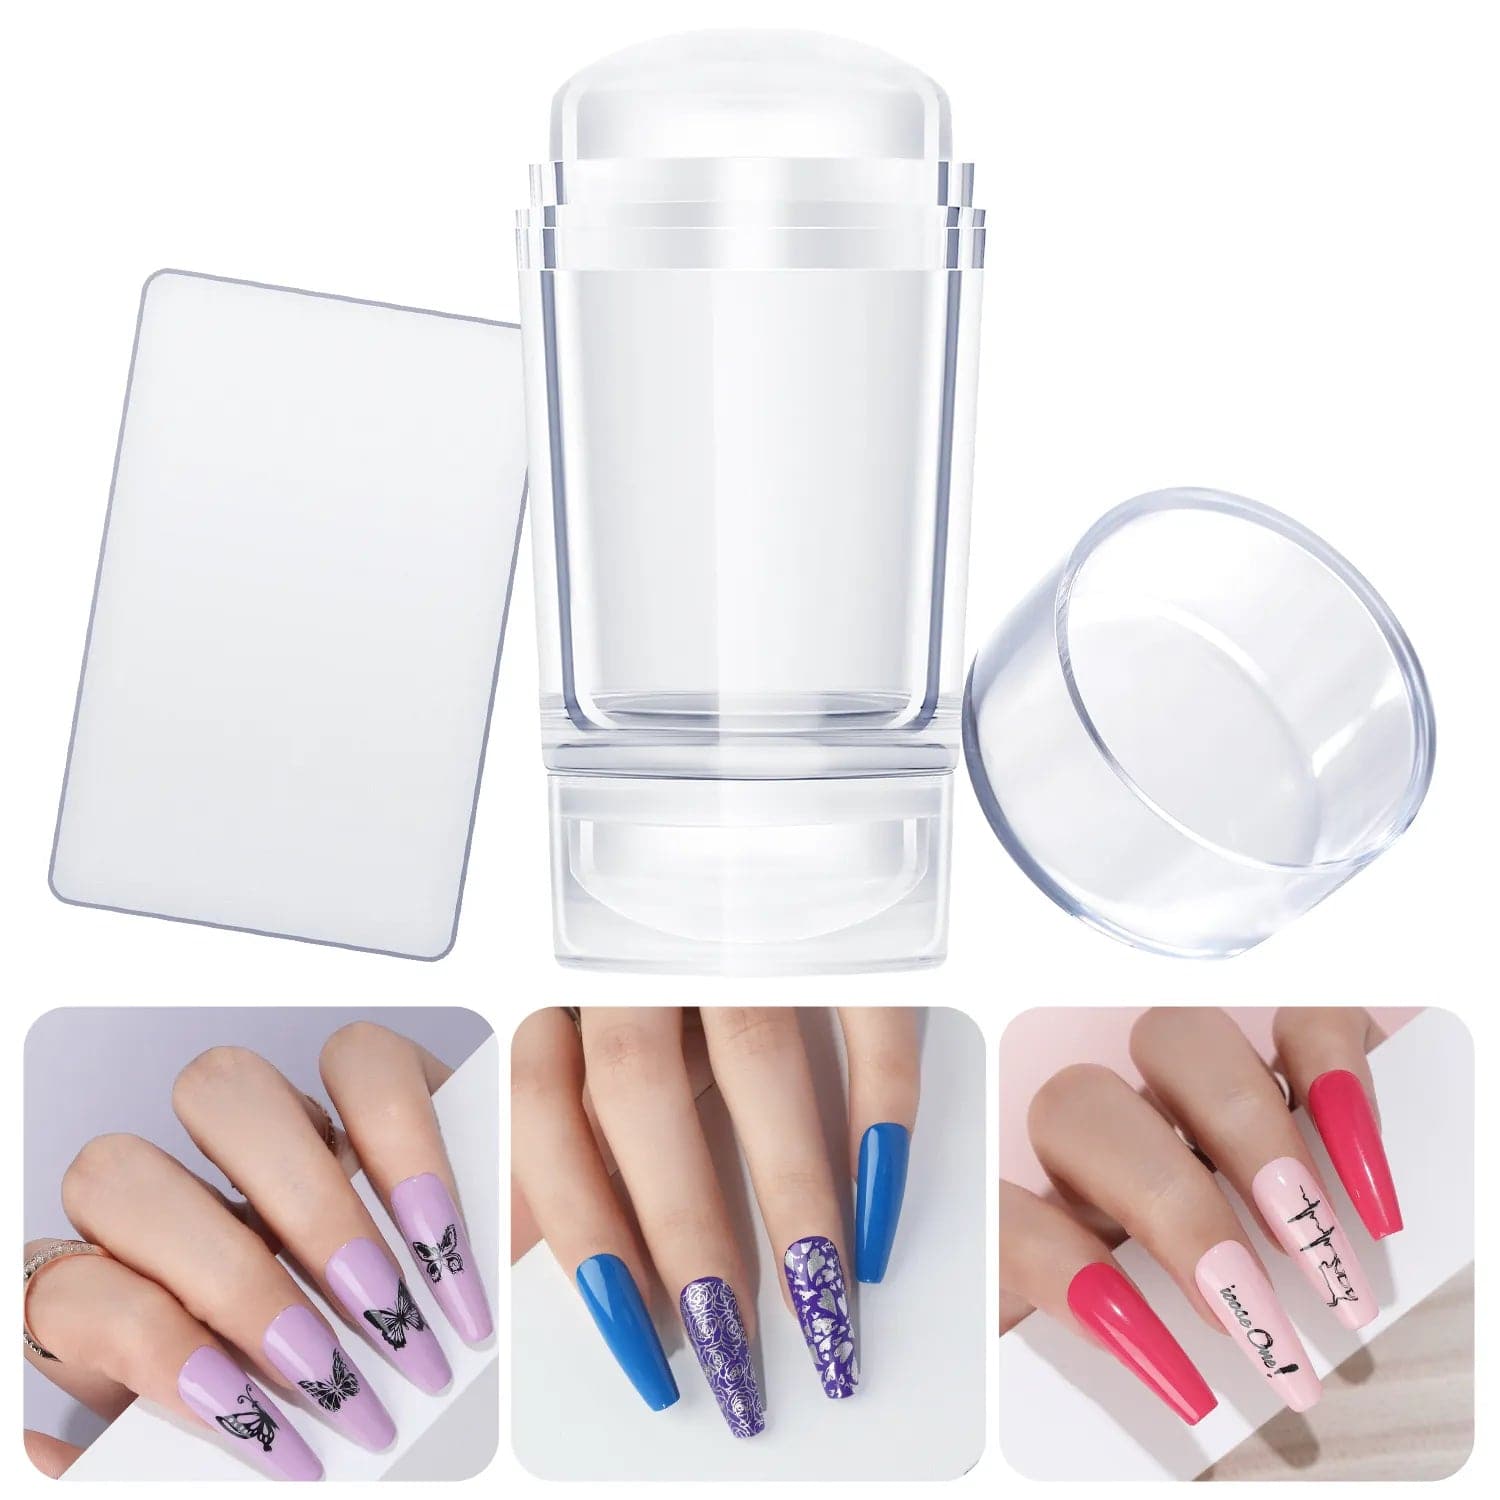 Silicone Square Stamping Nail Art Plates For Manicure Nails